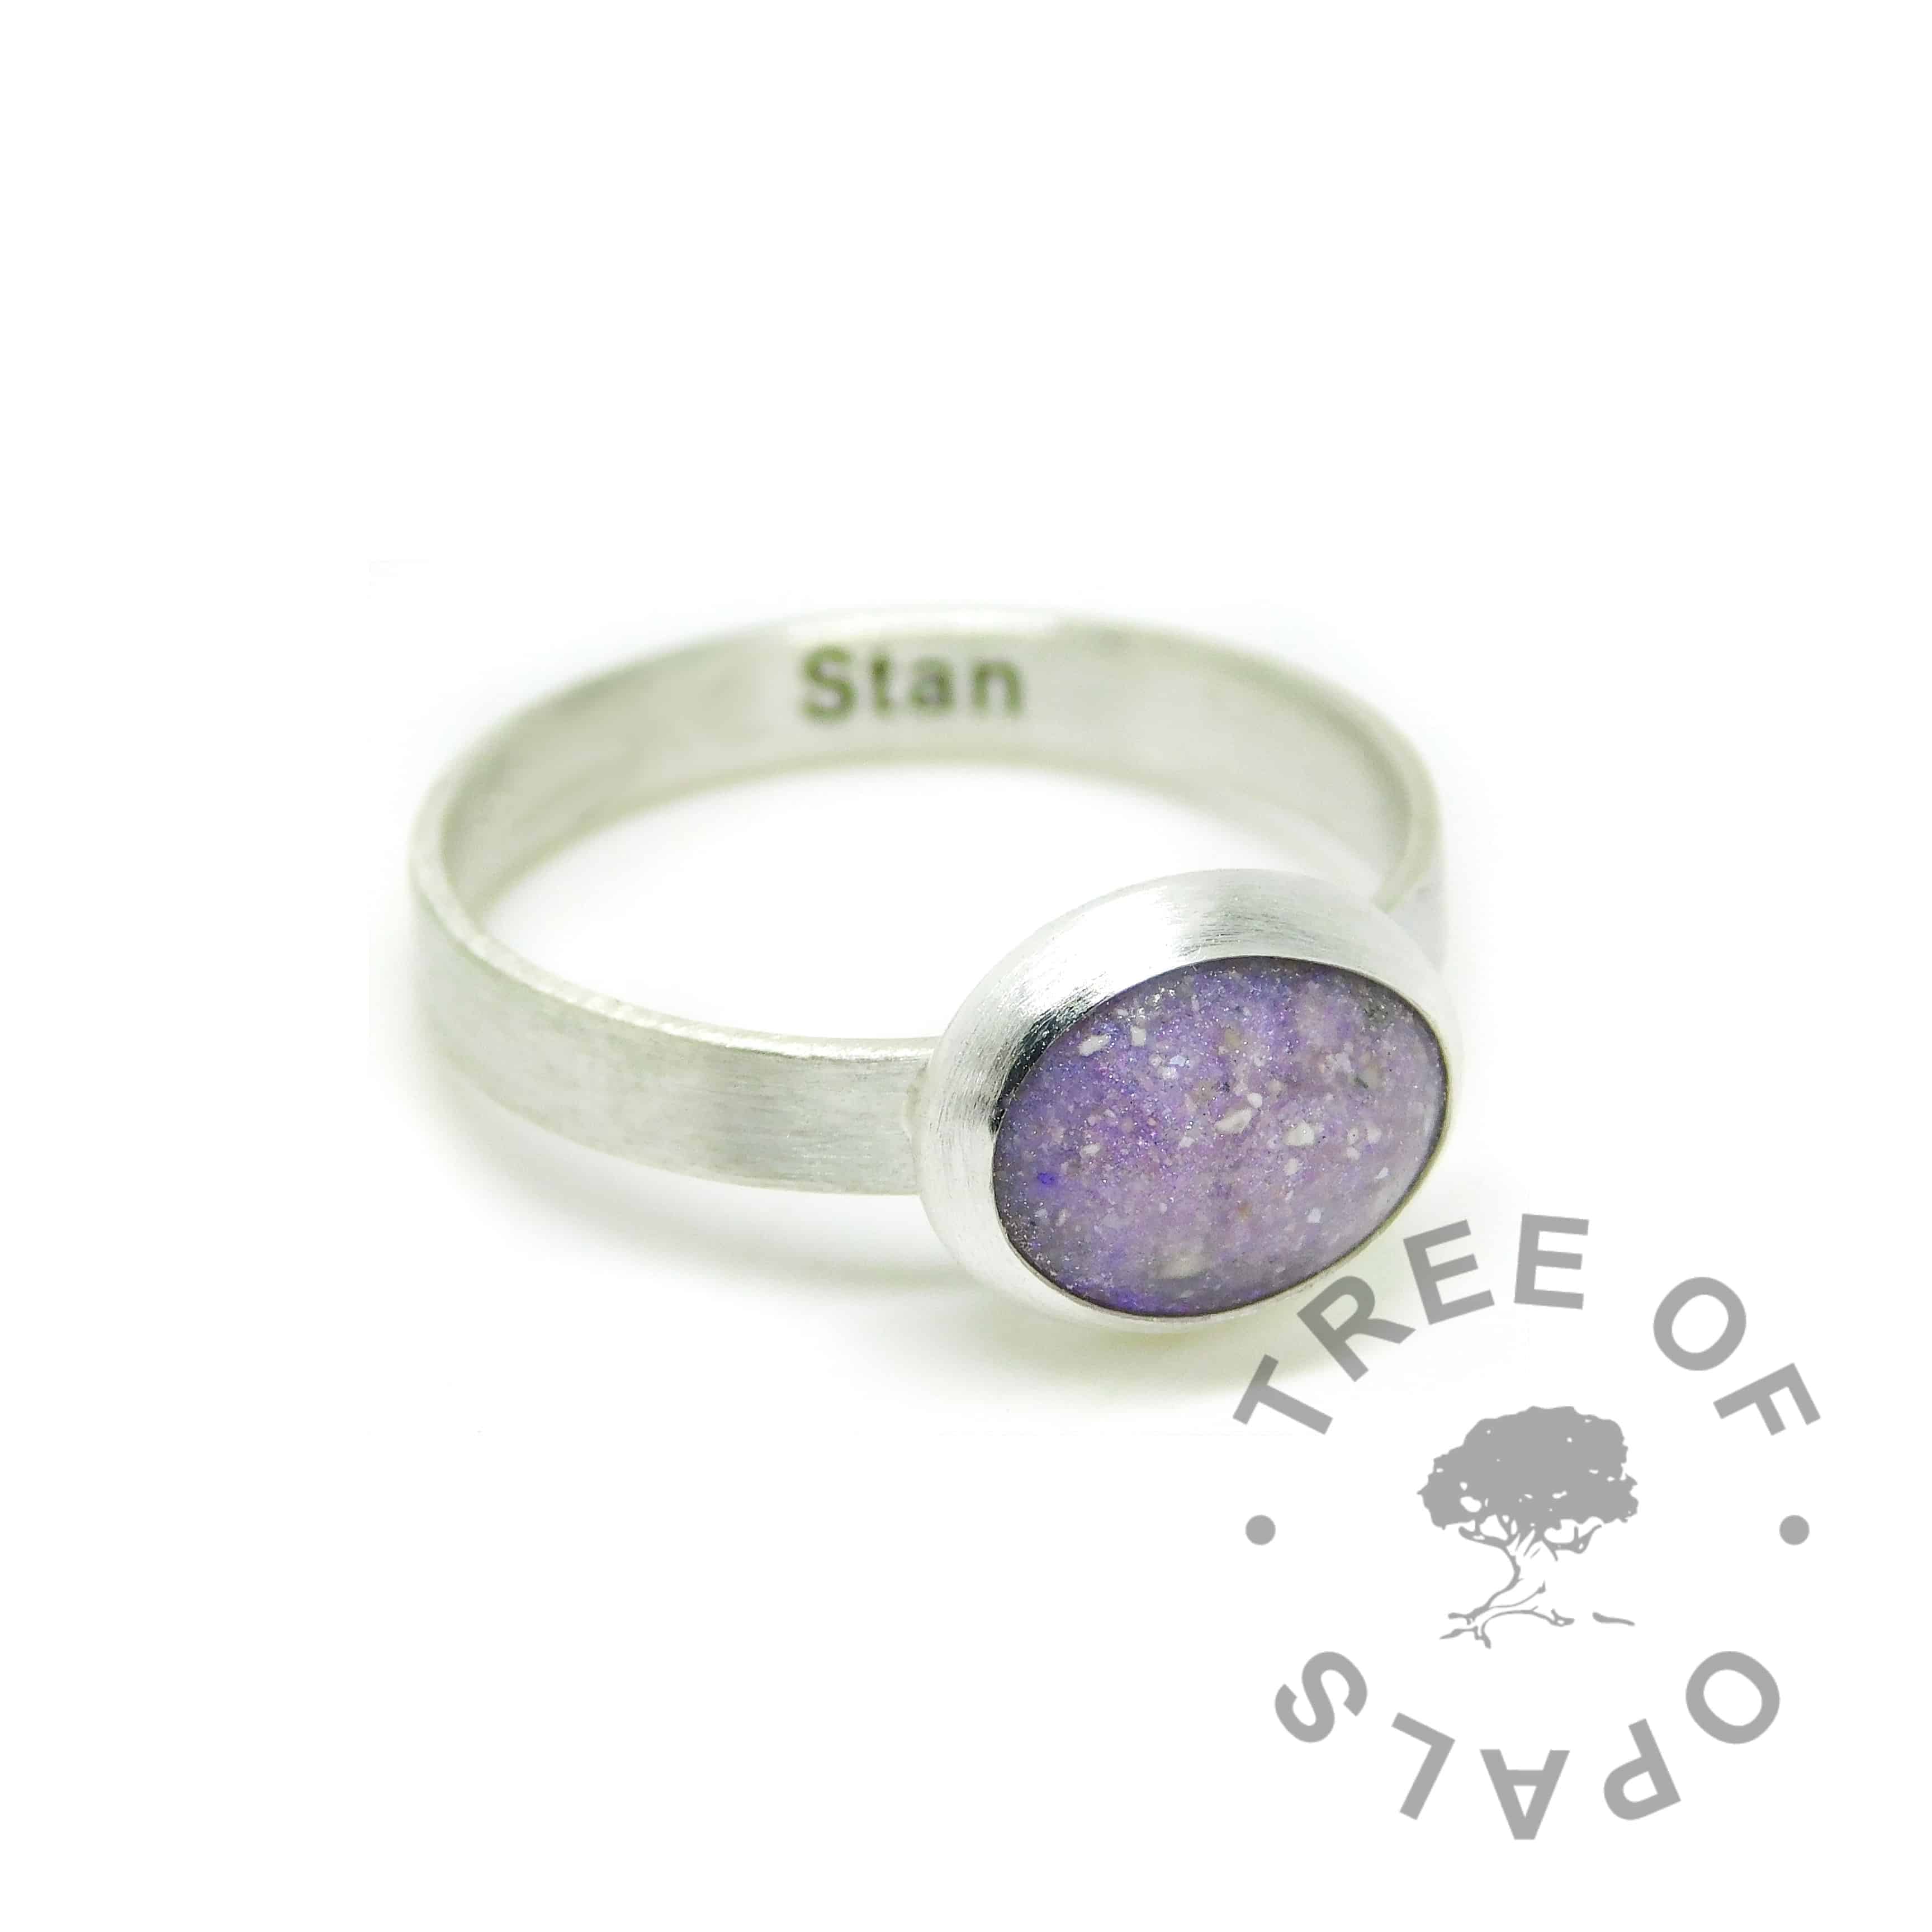 orchid purple cremation ash ring on a brushed wire band . Solid 925 sterling EcoSilver handmade ring. Cremains ring with engraved text on the inside of the band, in Arial font (some text removed for privacy). 10x8mm bezel cup rubbed over the cabochon for security.